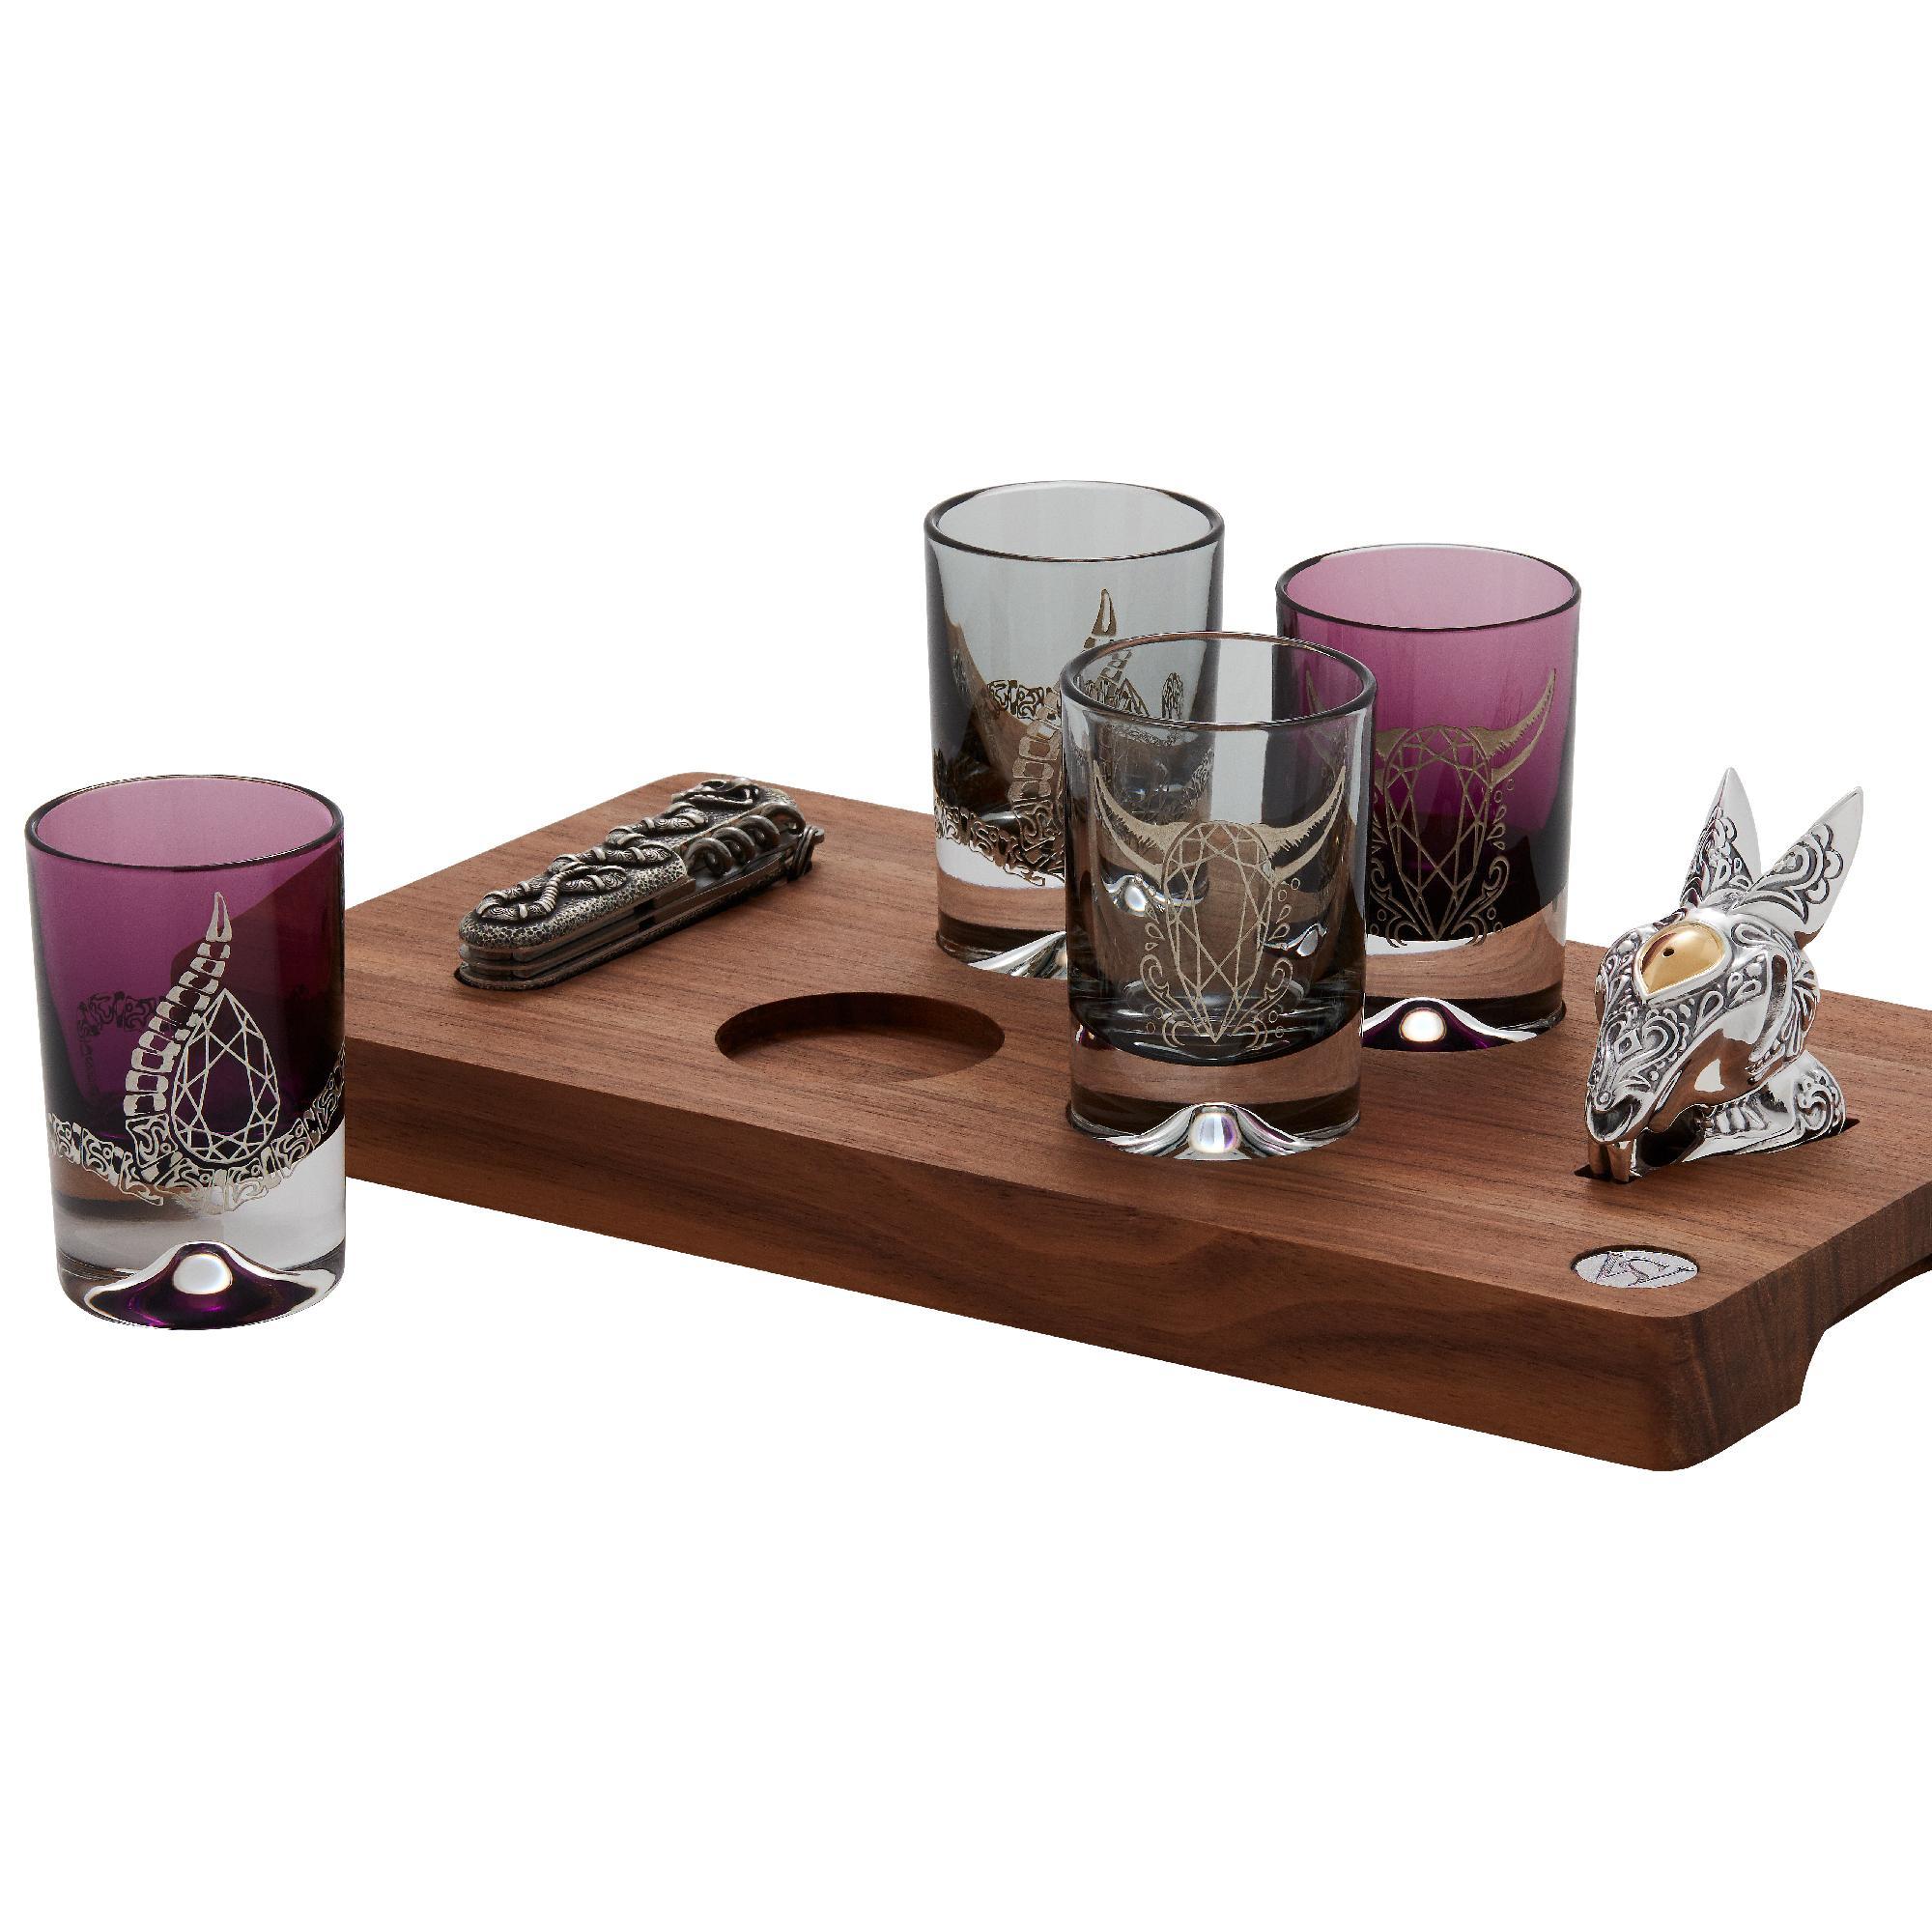 British Stephen Webster Tequila Lore Cow Engraved Detail Amethyst Shot Glass - Set of 2 For Sale